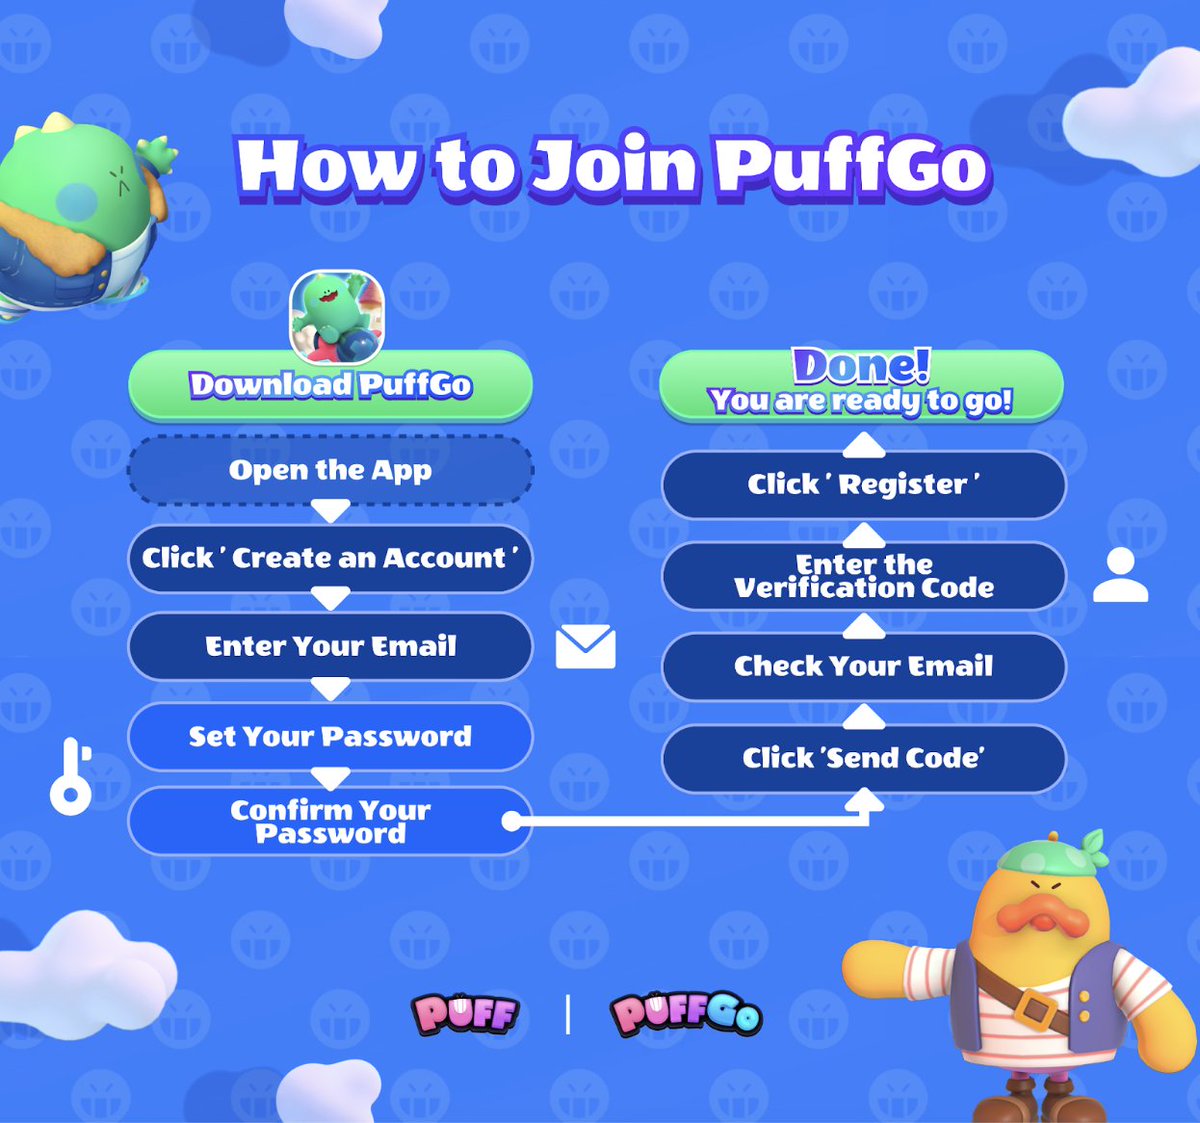 👉 Enter to Win Prizes:
1️⃣ Follow @Puffverse and @HellvenGate - Like & RT
2️⃣ Download PuffGo and PuffTown app from puffverse.pro and rate both apps 5 stars on play store.
3️⃣ Create an account in both PuffGo and PuffTown with the same email on both app